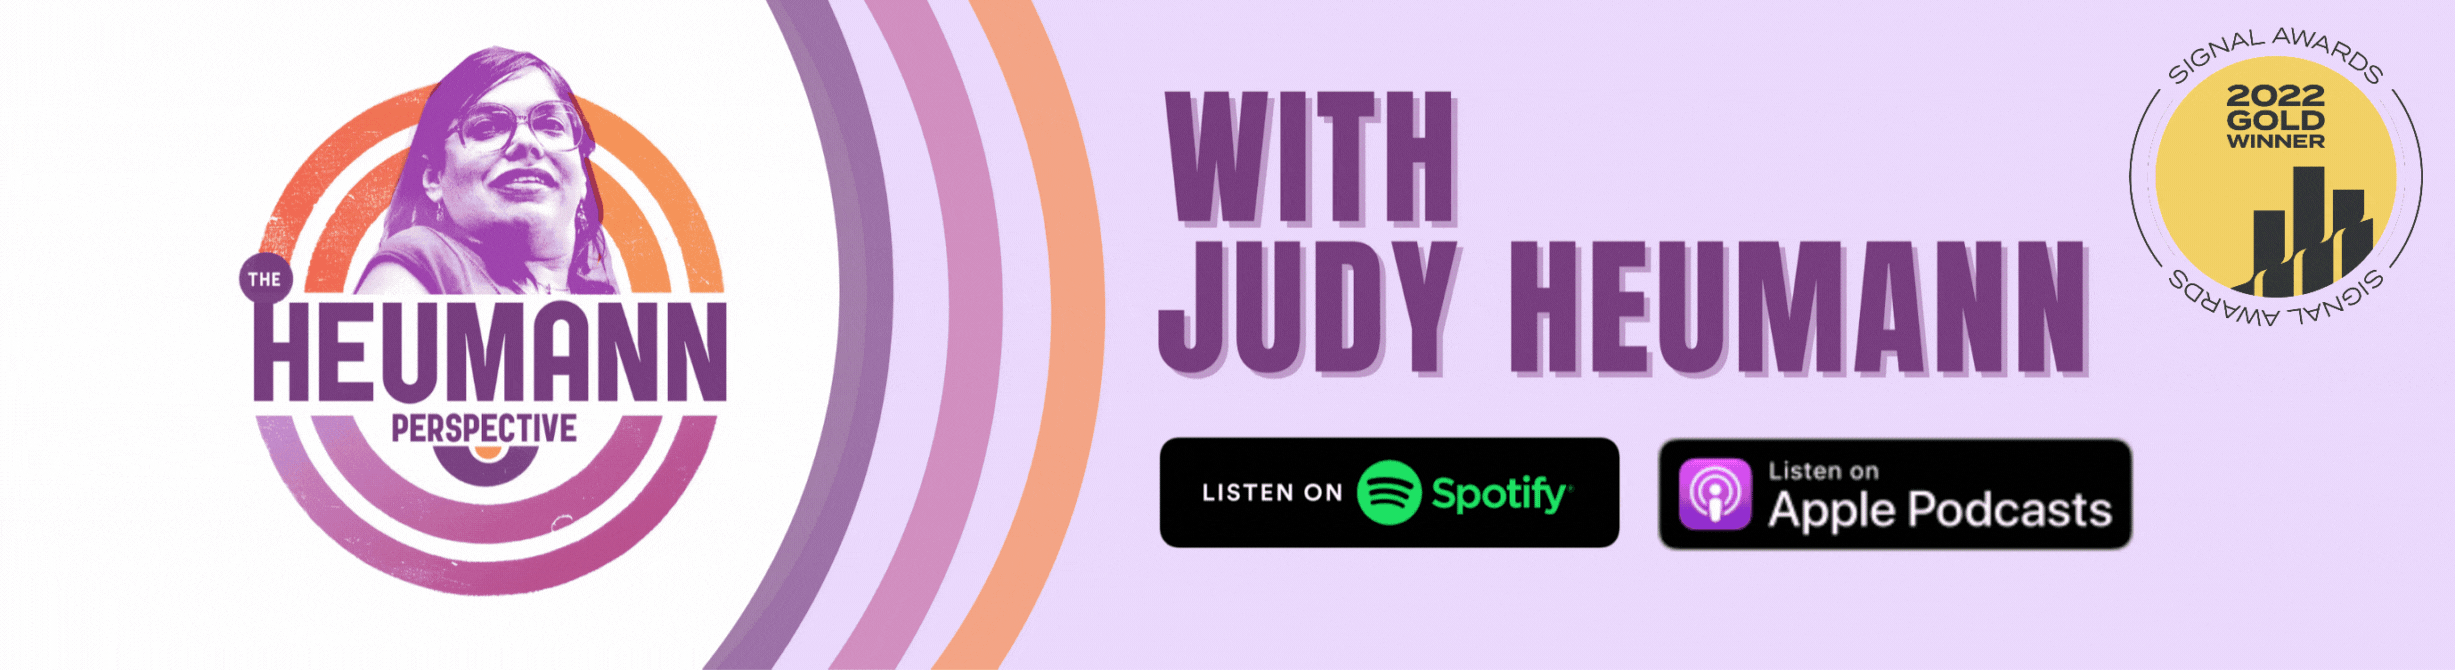 A graphic with a lilac background with a white semi circle on the left with the logo of The Heumann Perspective on top of it. There are three curved lines next to the circle going in order of purple, pink and orange. On the right is bold purple text that reads "with Judy Heumann." Underneath that are the logos for Spotify and Apple Podcasts. In the top right corner is a 2022 Signal Gold Winner award logo.